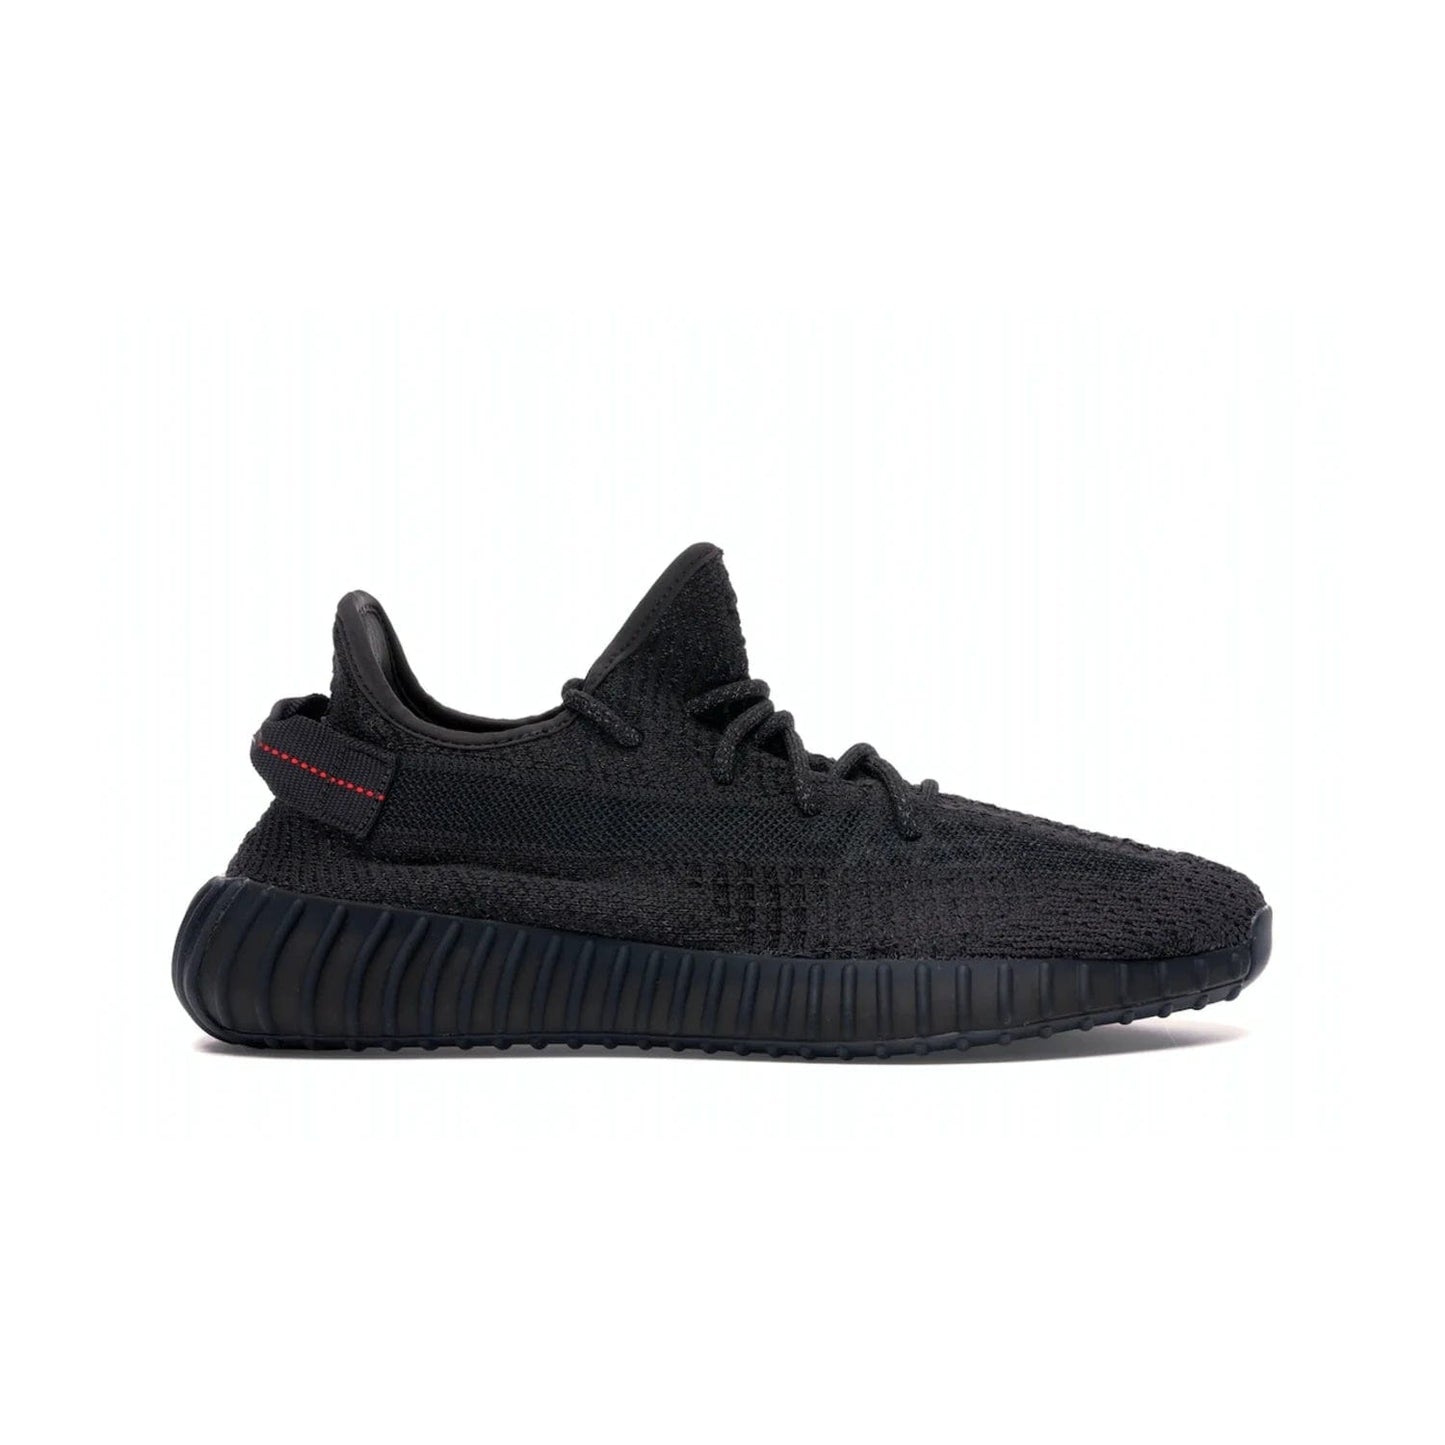 adidas Yeezy Boost 350 V2 Static Black (Reflective) - Image 1 - Only at www.BallersClubKickz.com - Make a statement with the adidas Yeezy Boost 350 V2 Static Black Reflective. All-black upper, reflective accents, midsole, and sole combine for a stylish look. High quality materials. June 2019 release. Add to your collection today.